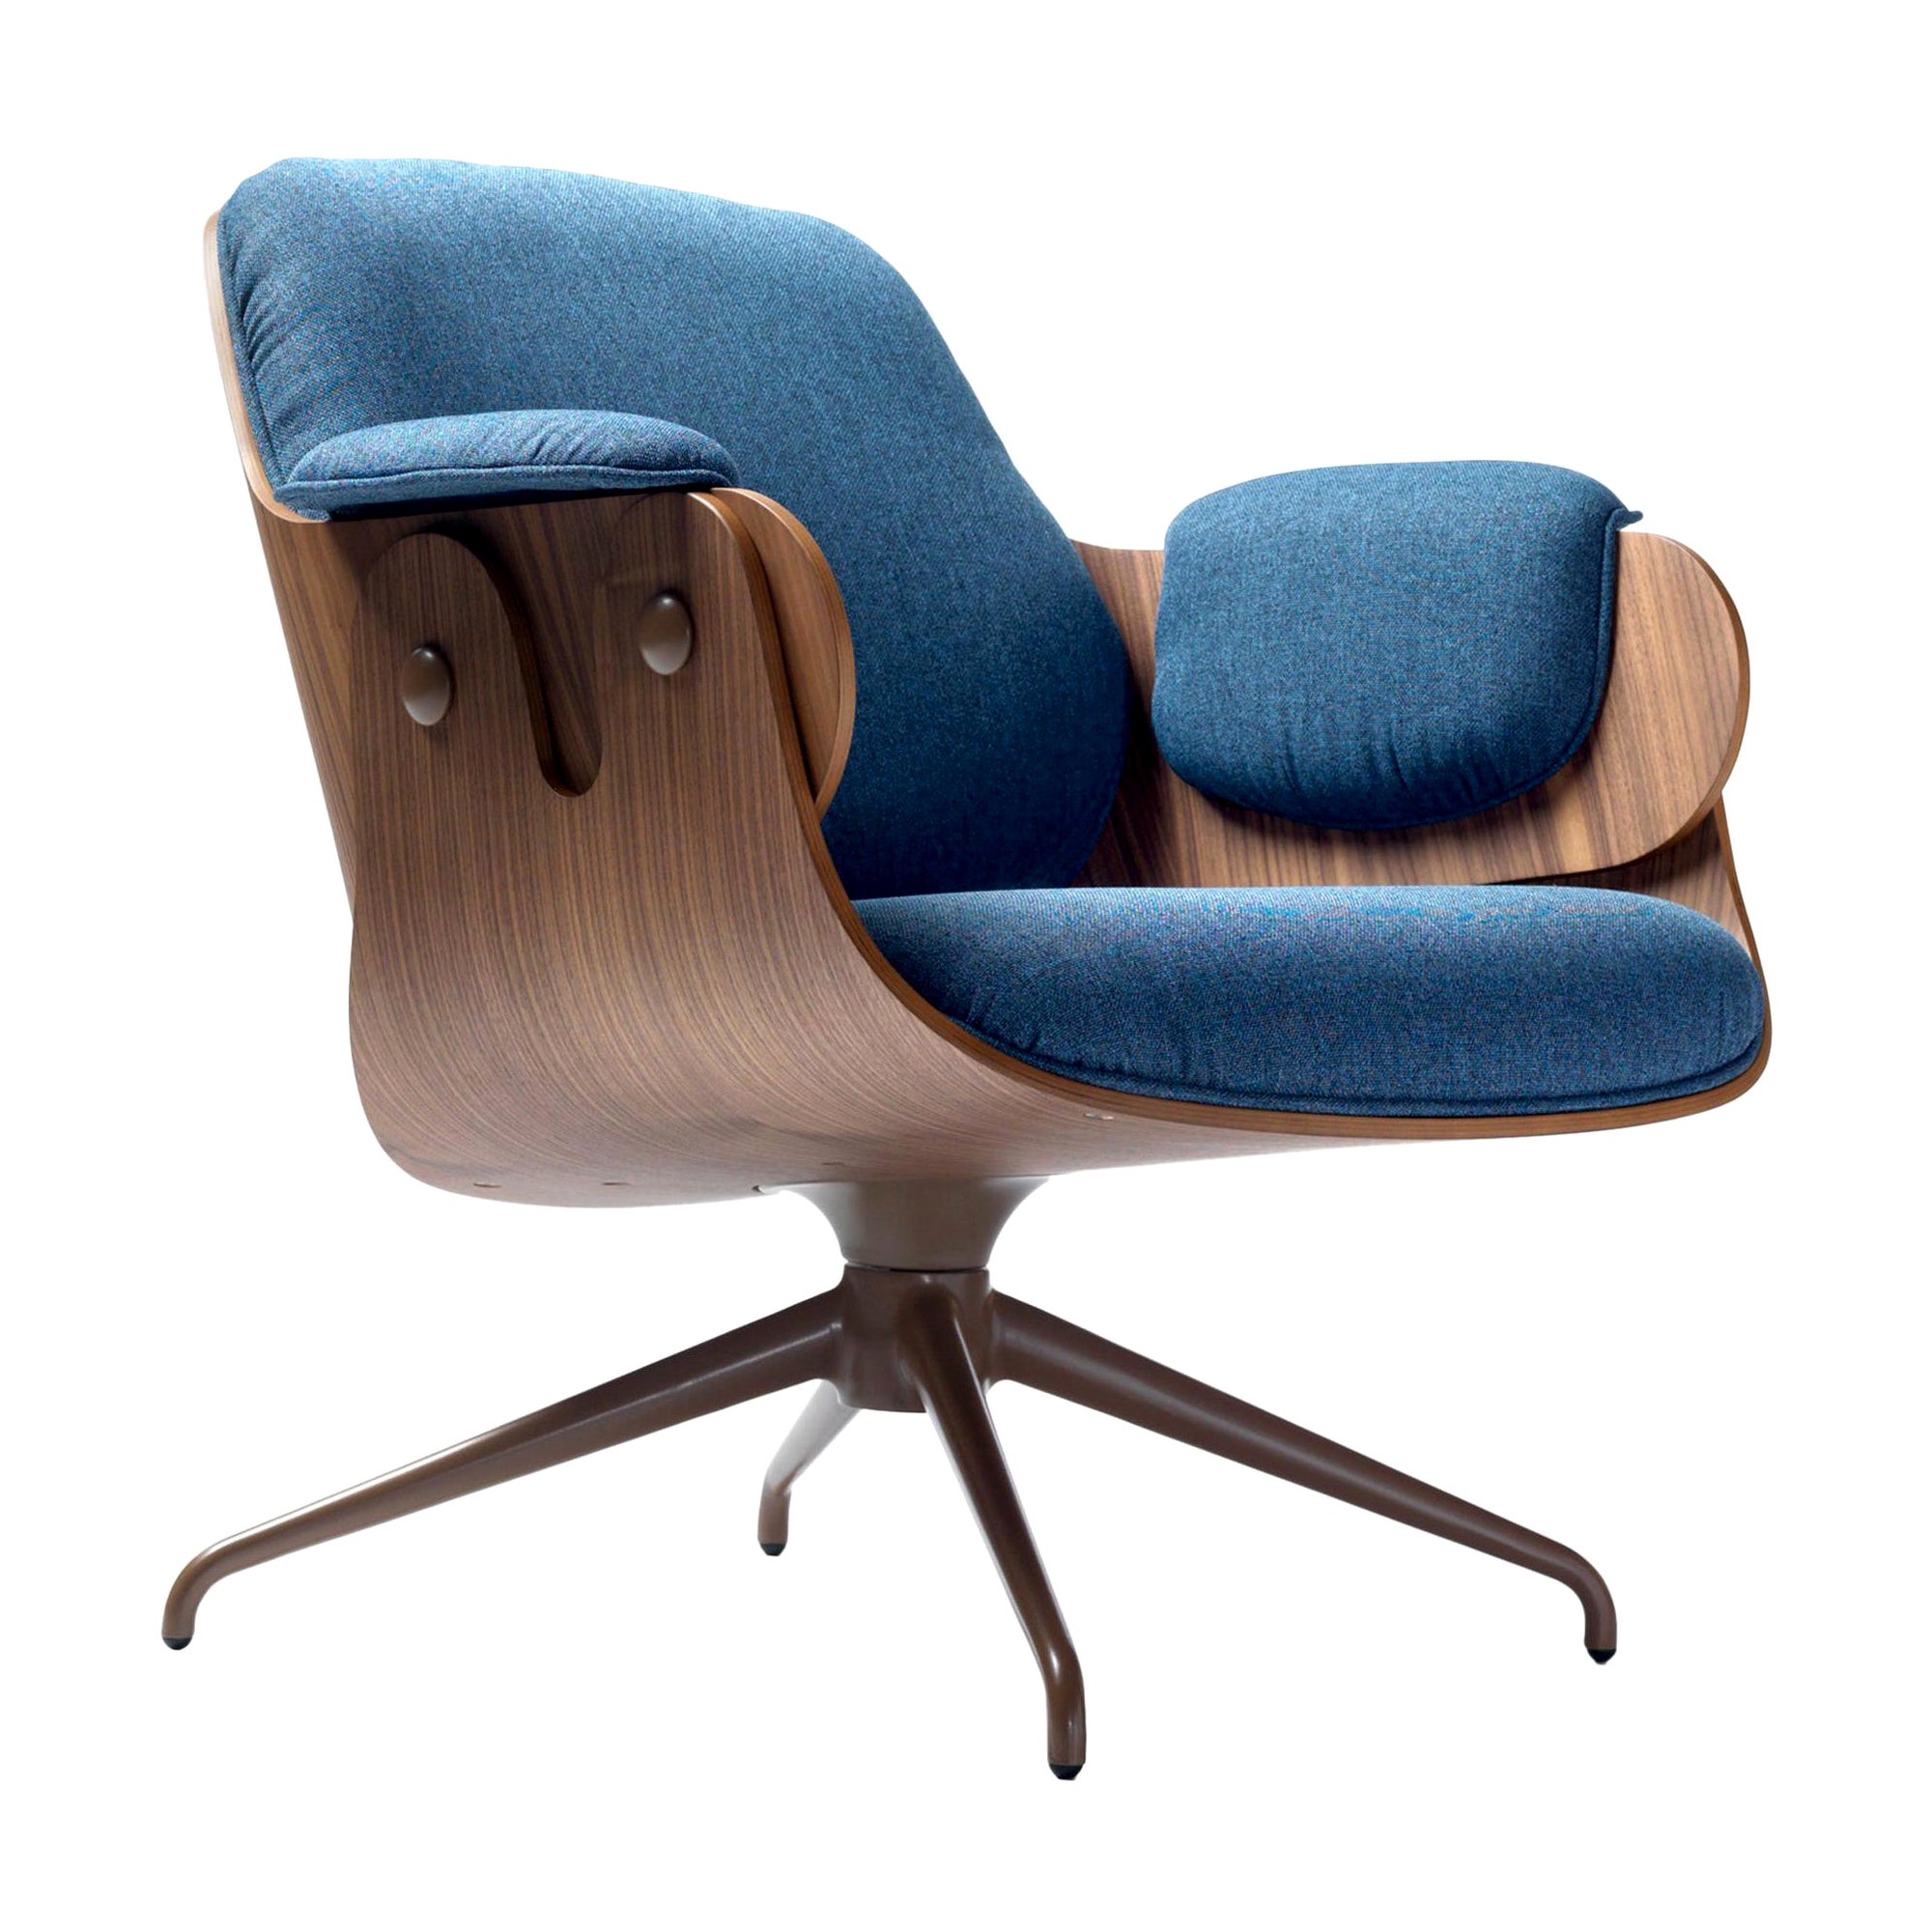 Jaime Hayon, Contemporary, Walnut, Blue Upholstery Low Lounger Armchair